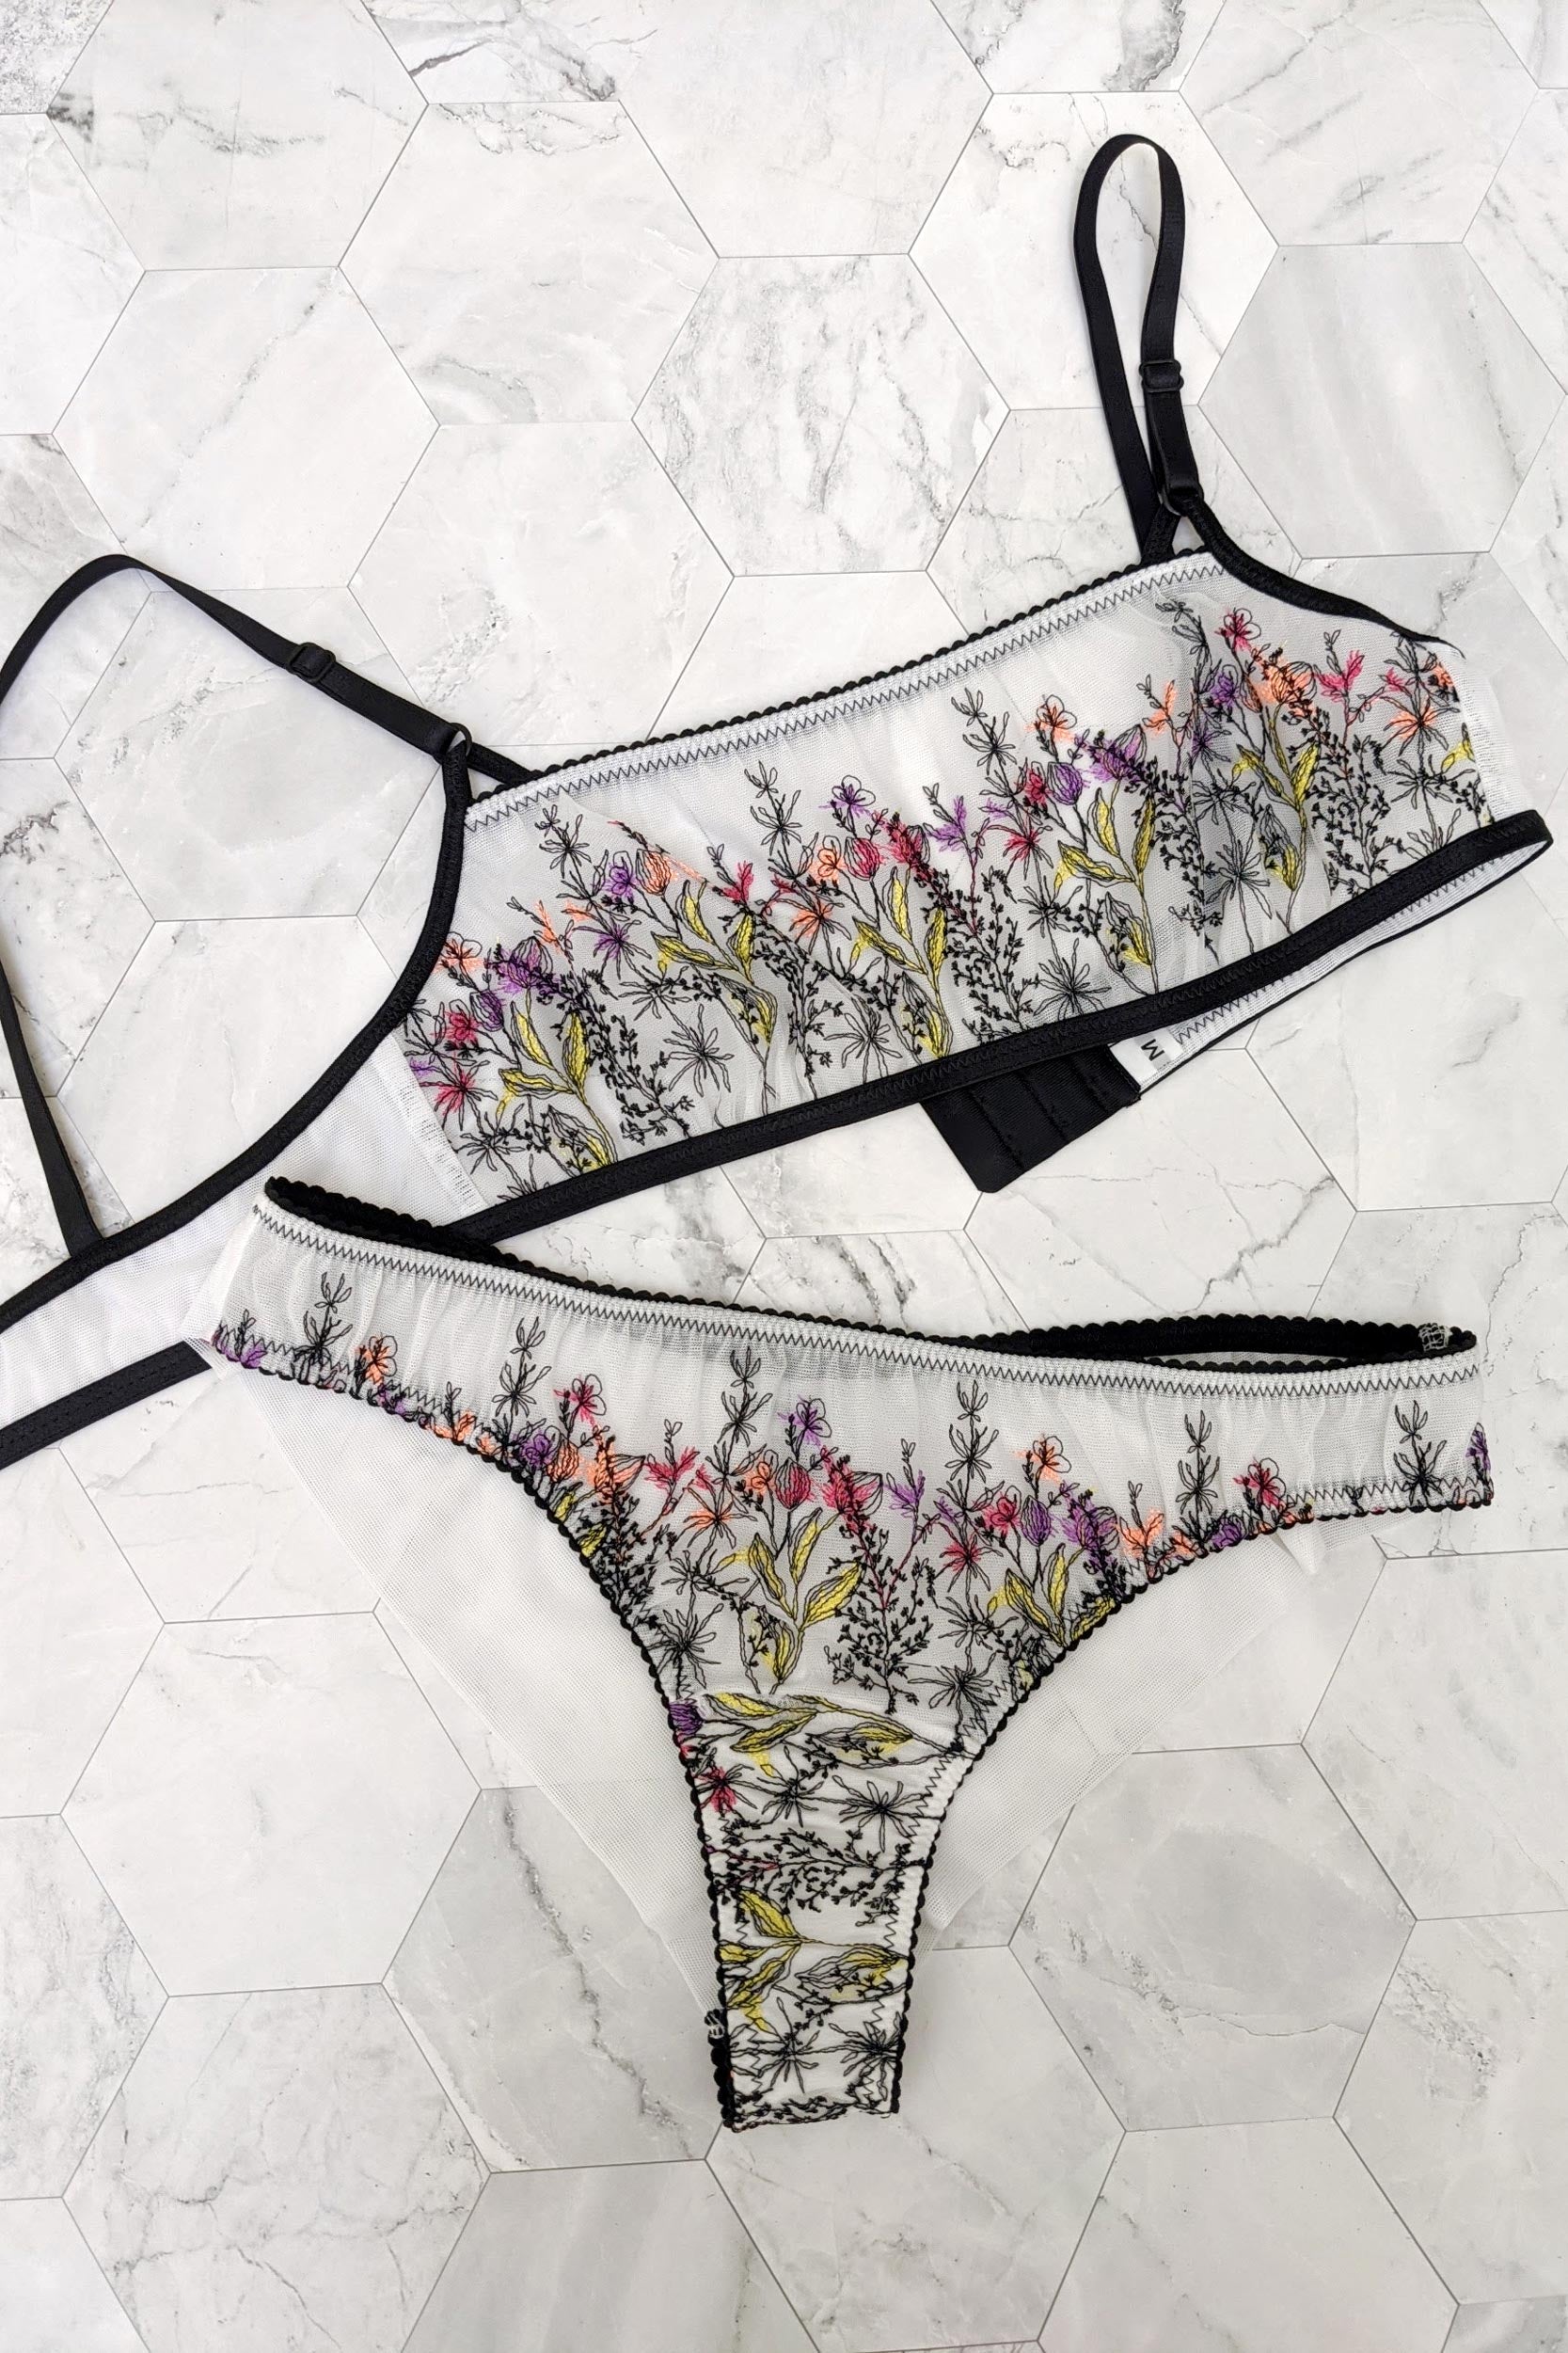 Floral lingerie set with an embroidered bra and cheeky panties